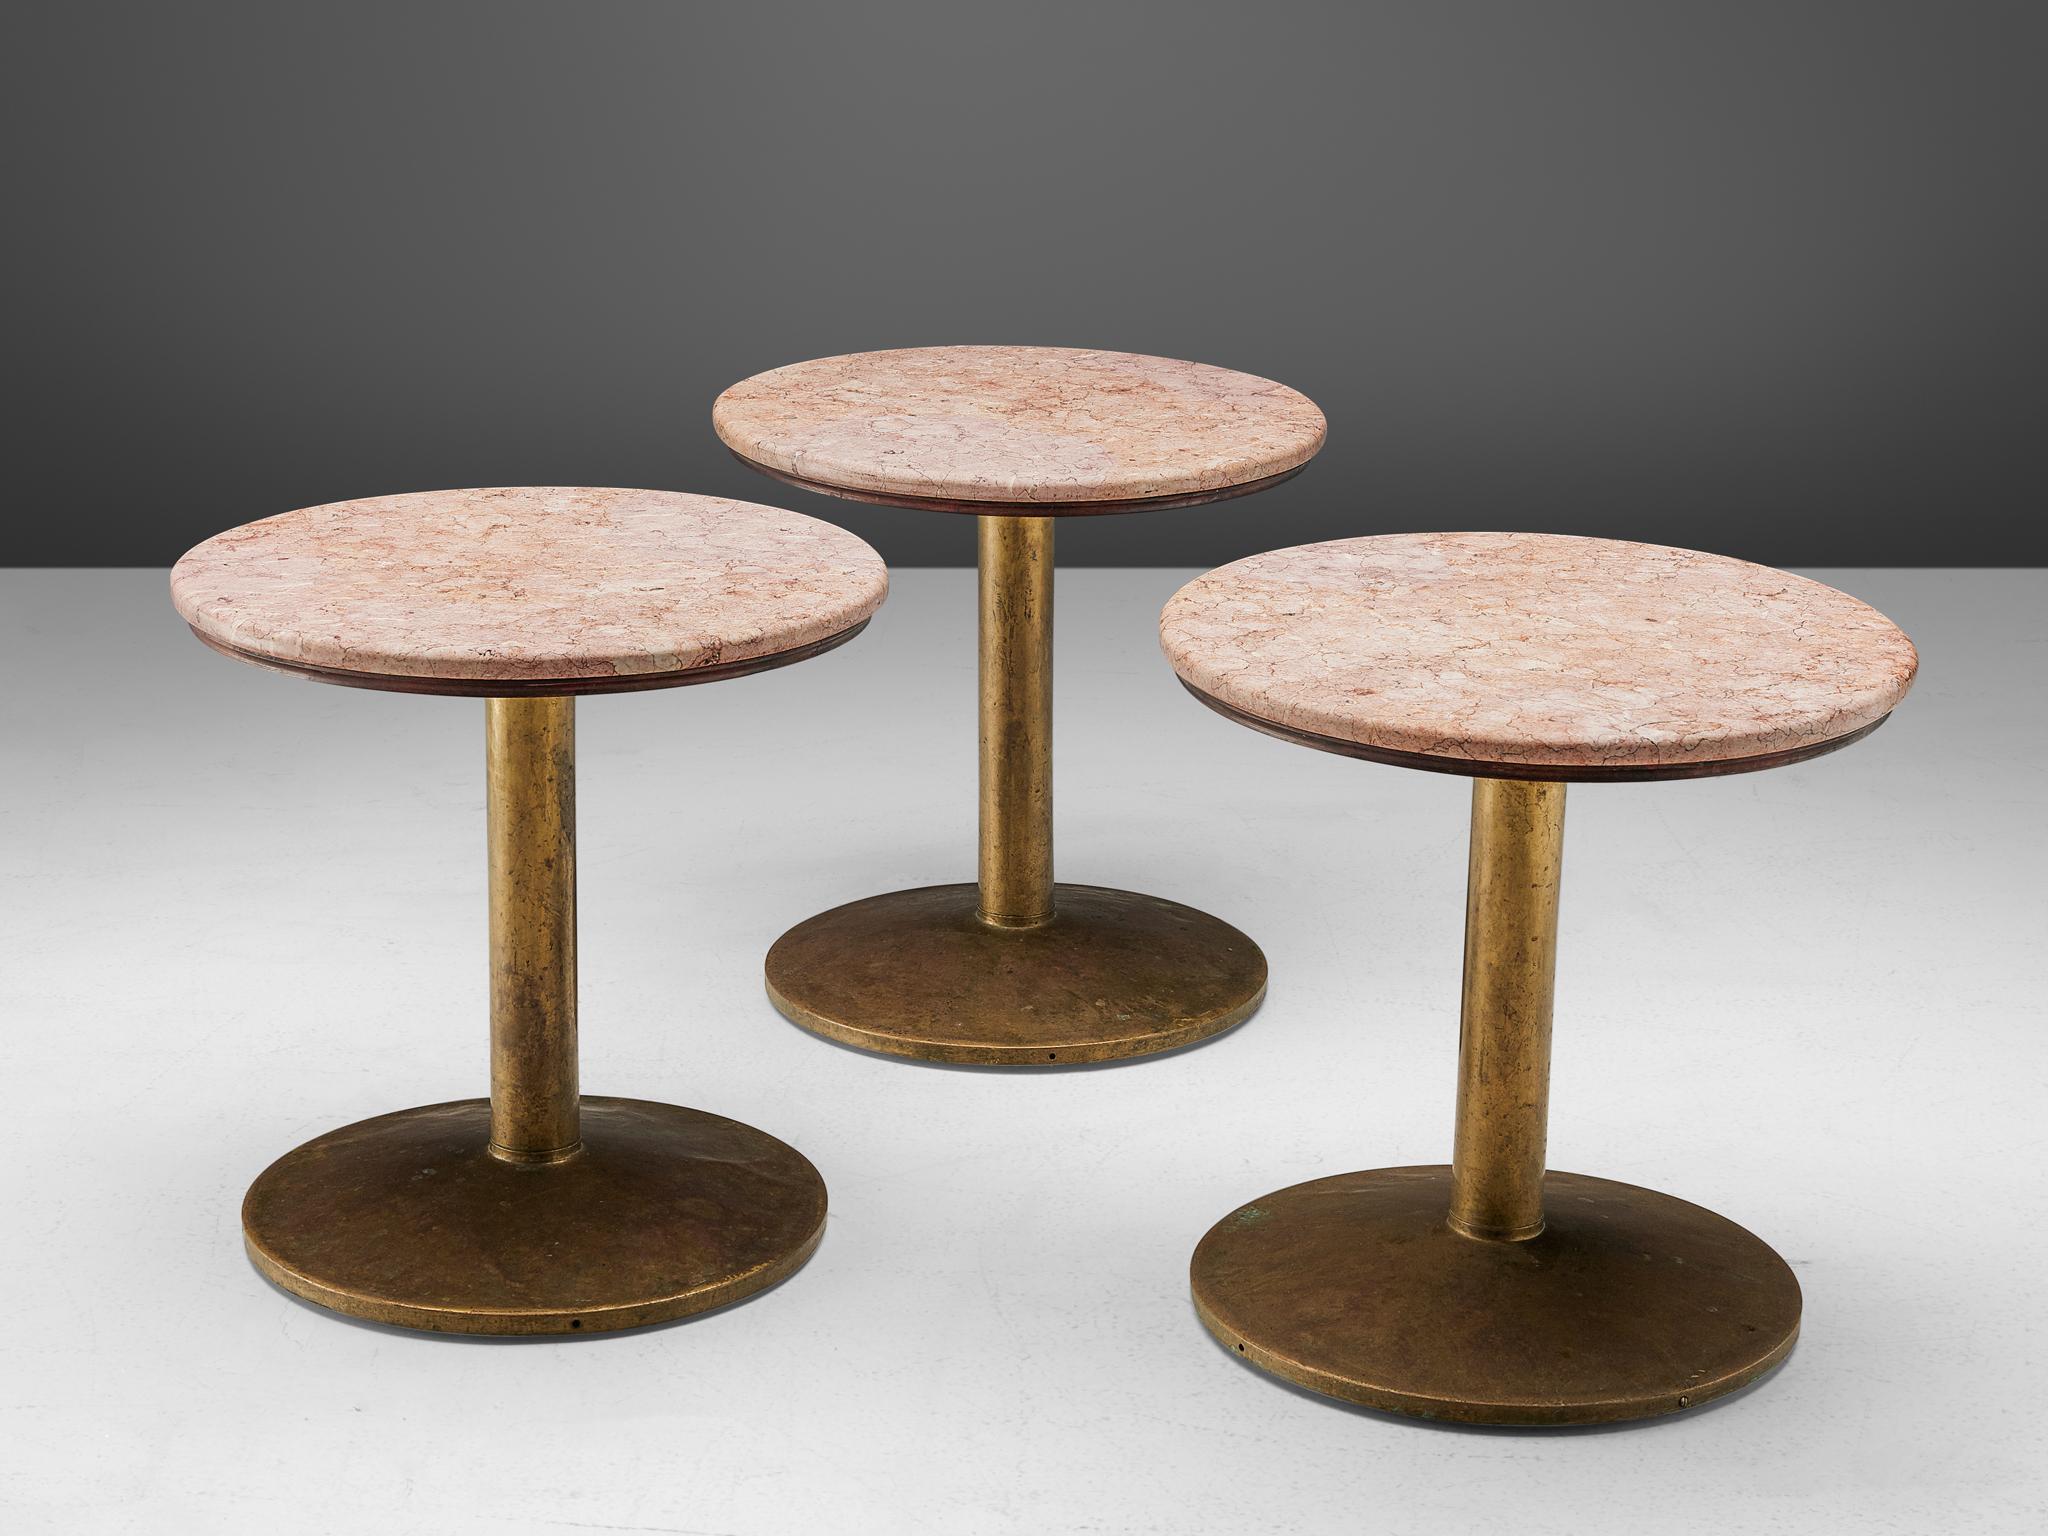 Brass dining tables with rose marble top, France, 1960s.

A circular pedestal table in rose marble with a brass foot. The table has a beautiful contrast between the rustic brass base and the refined marble top. With their modest size, these tables